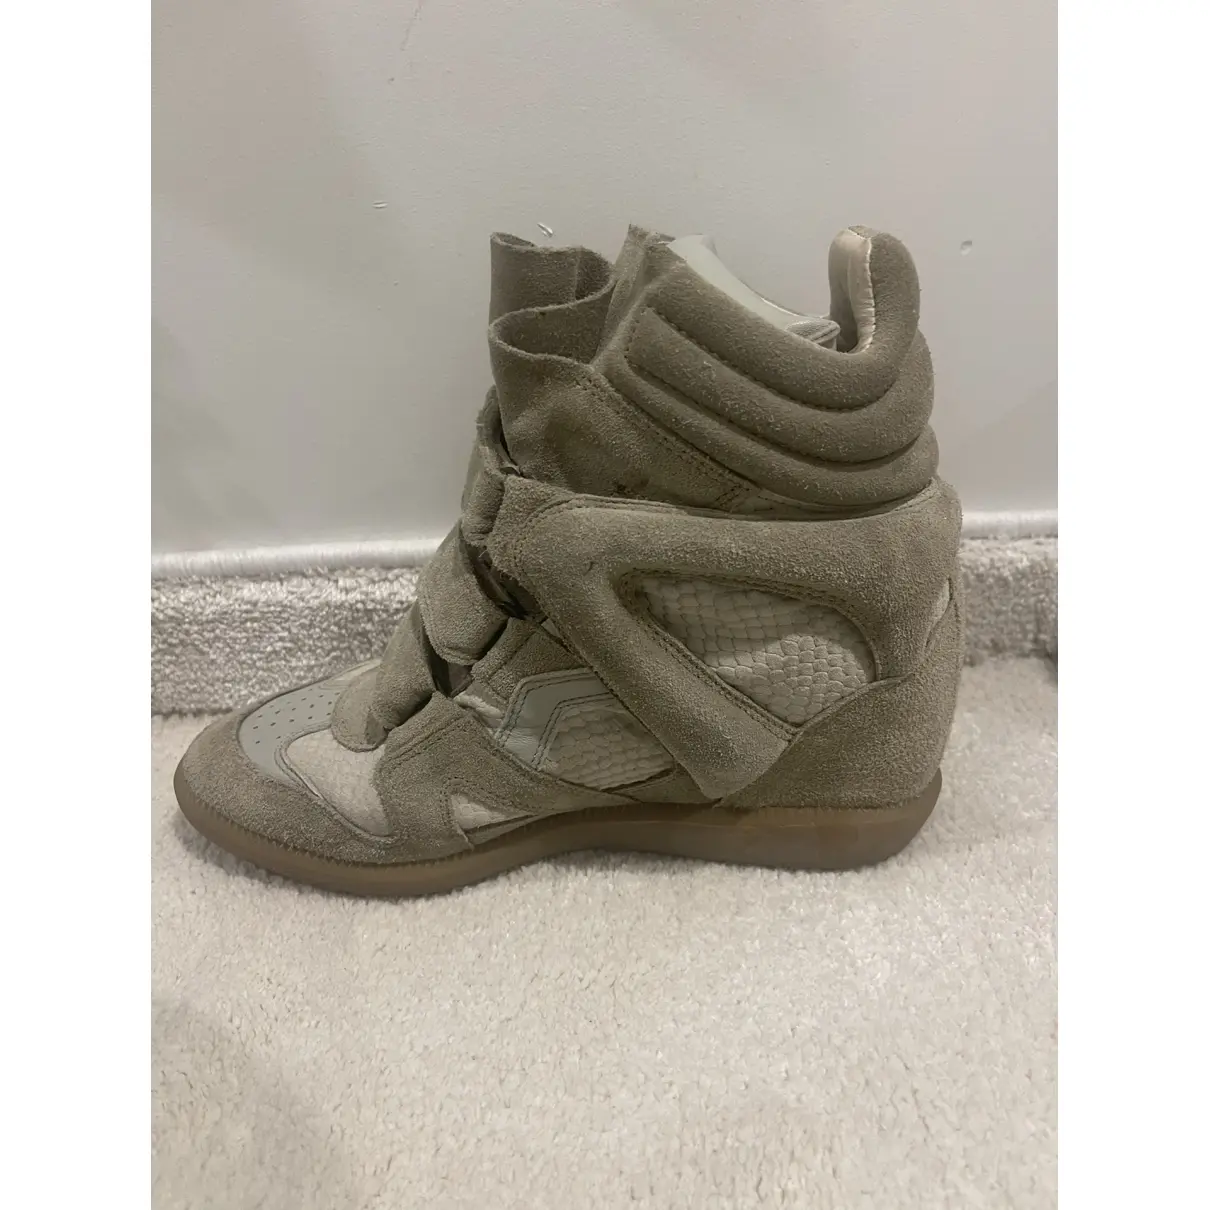 Buy Isabel Marant Bayley trainers online